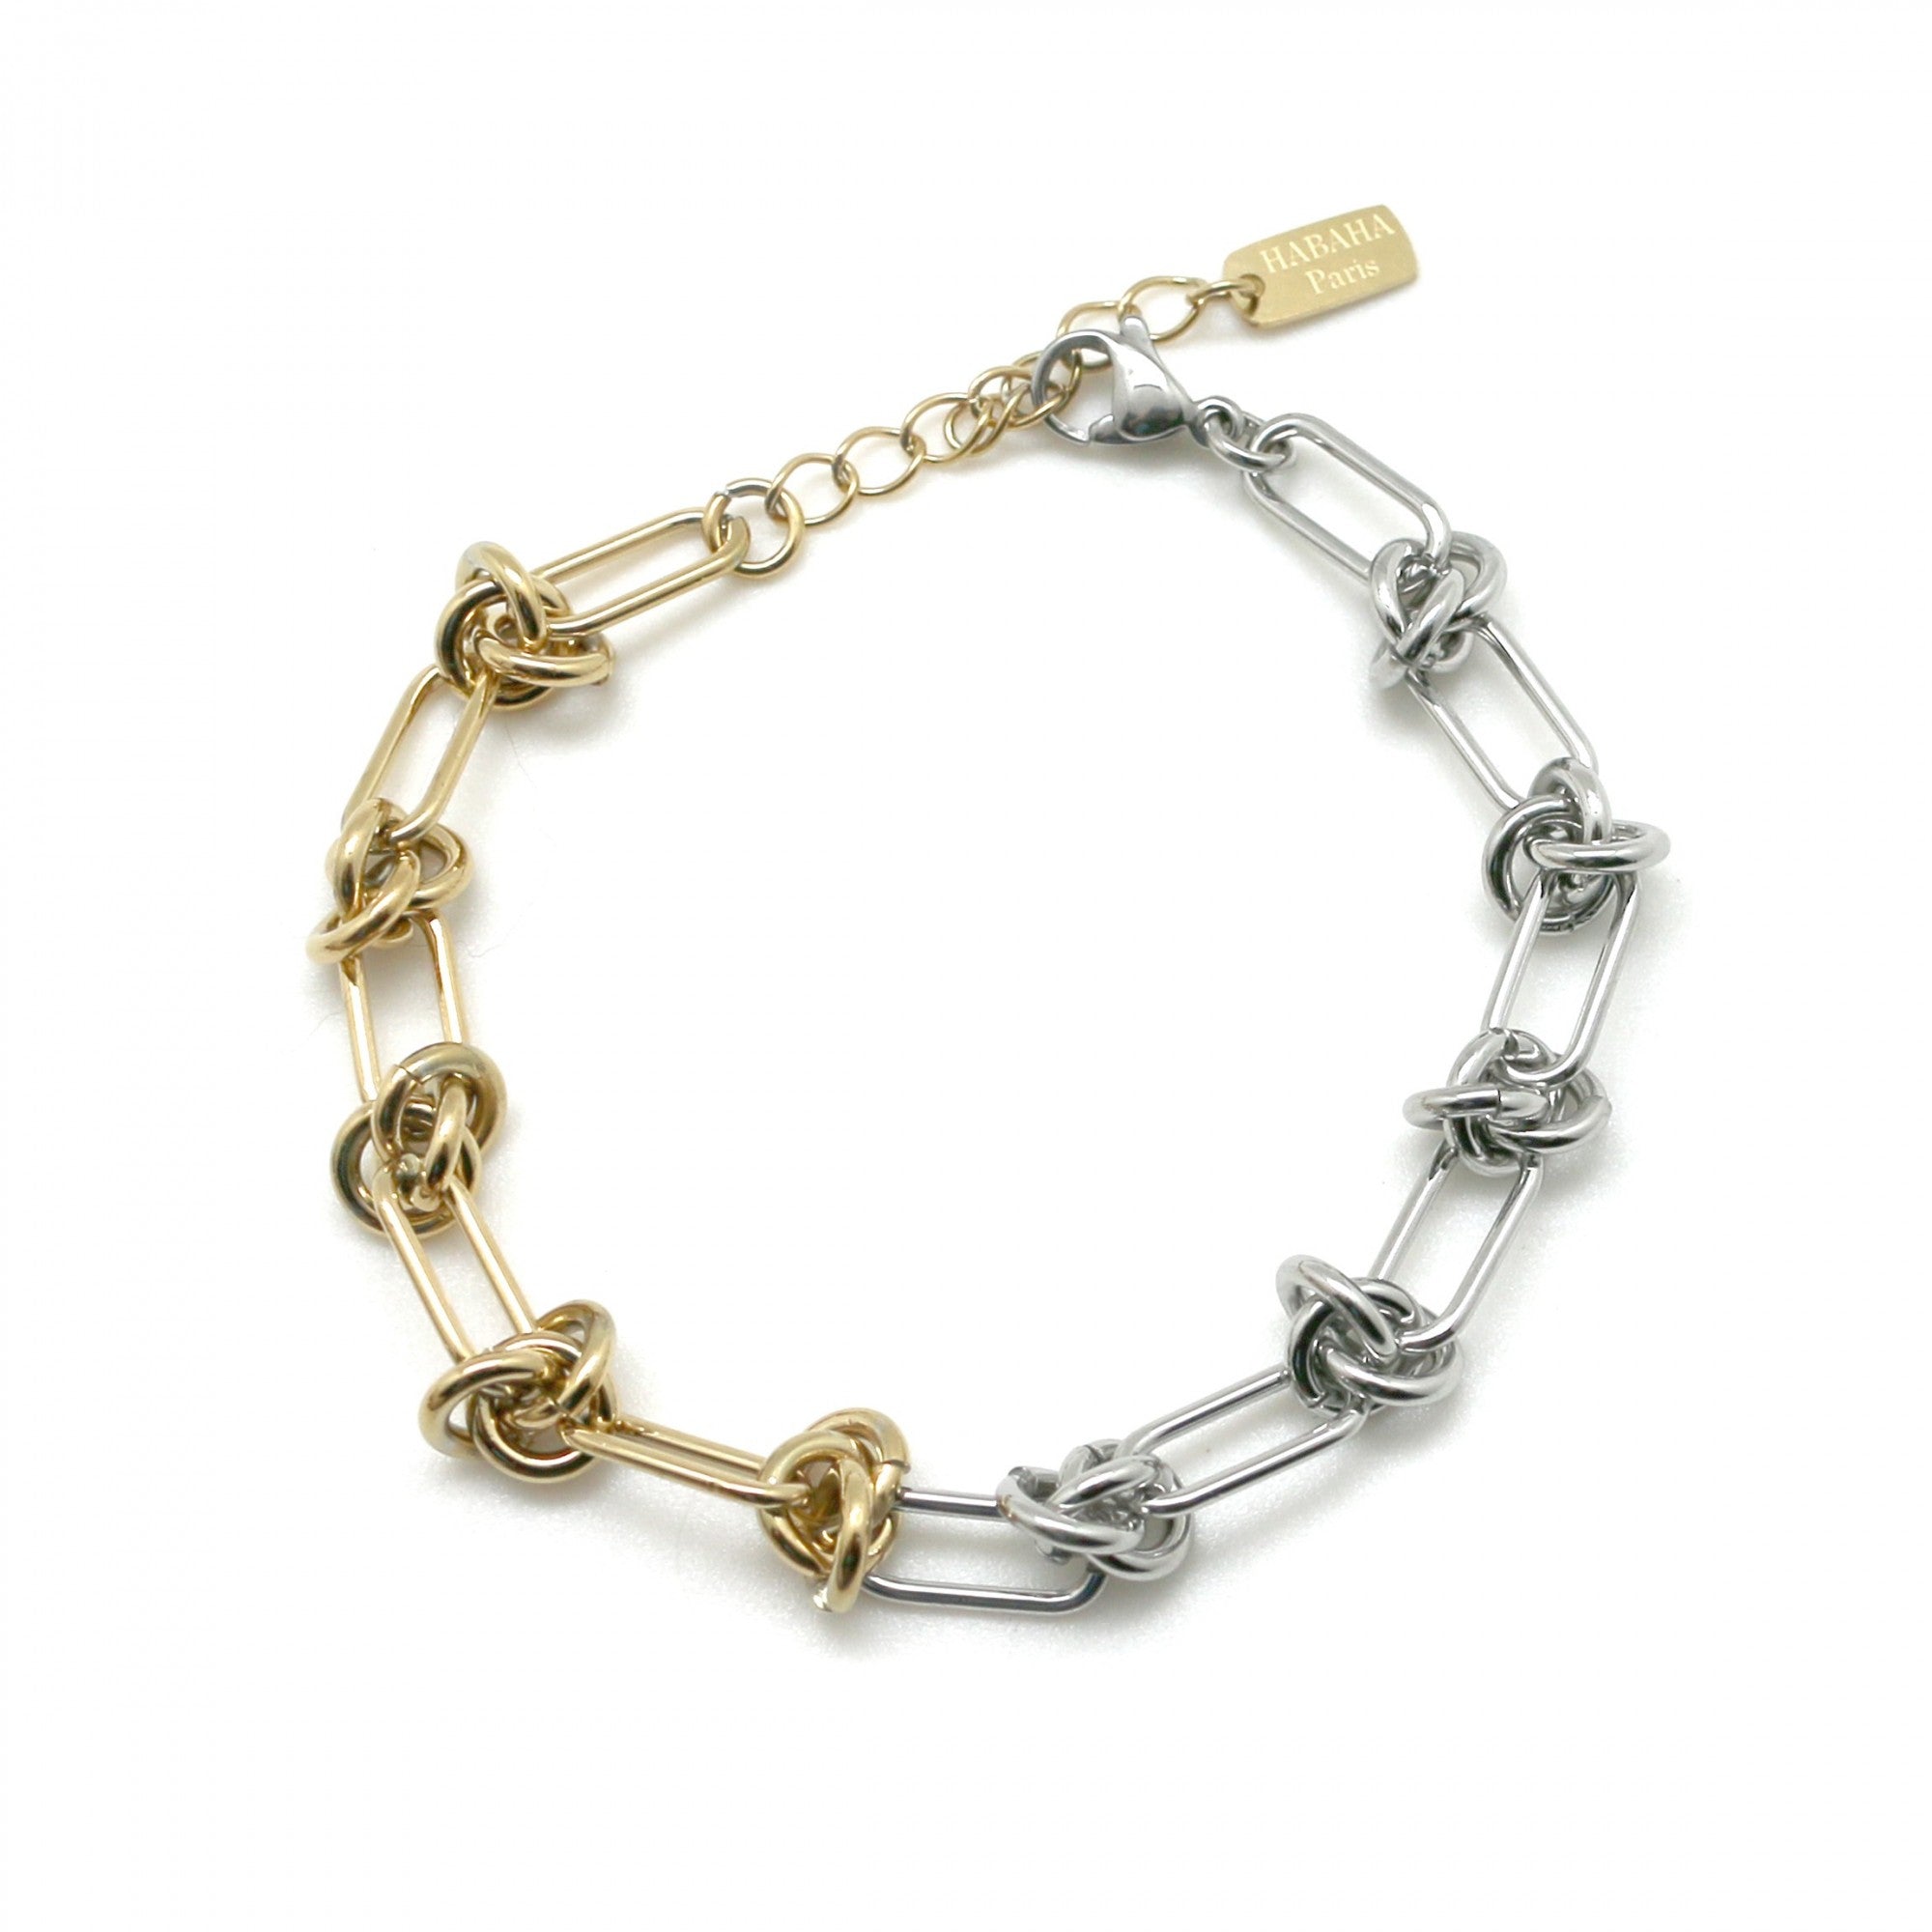 Two-color knotted bracelet